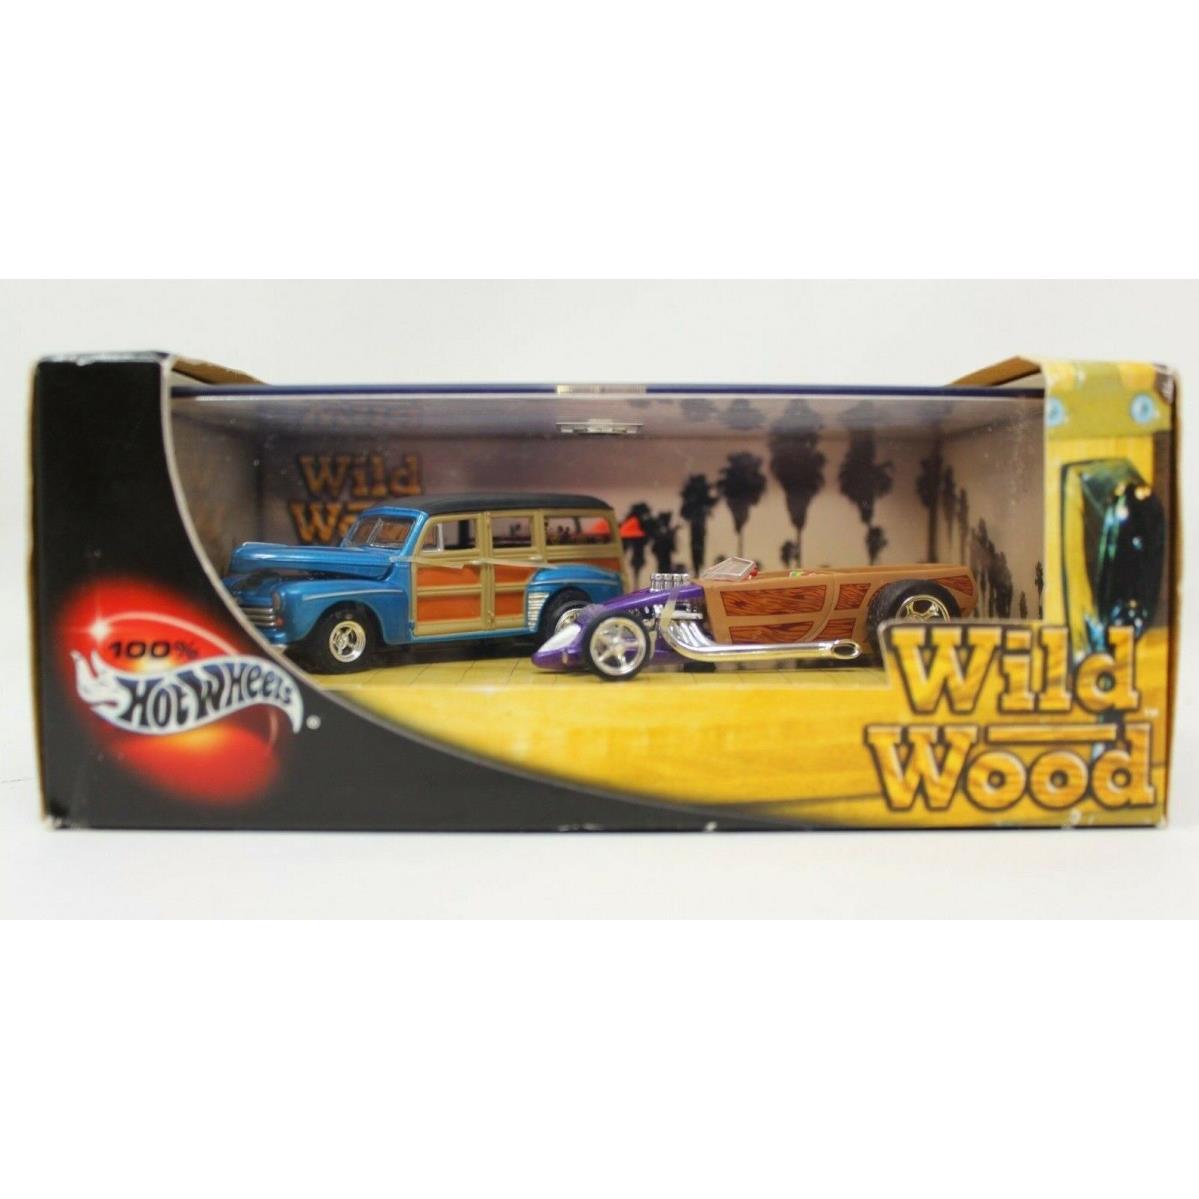 Hot Wheels Limited Edition - Wild Wood W/surfboards 2 Car Set - NM